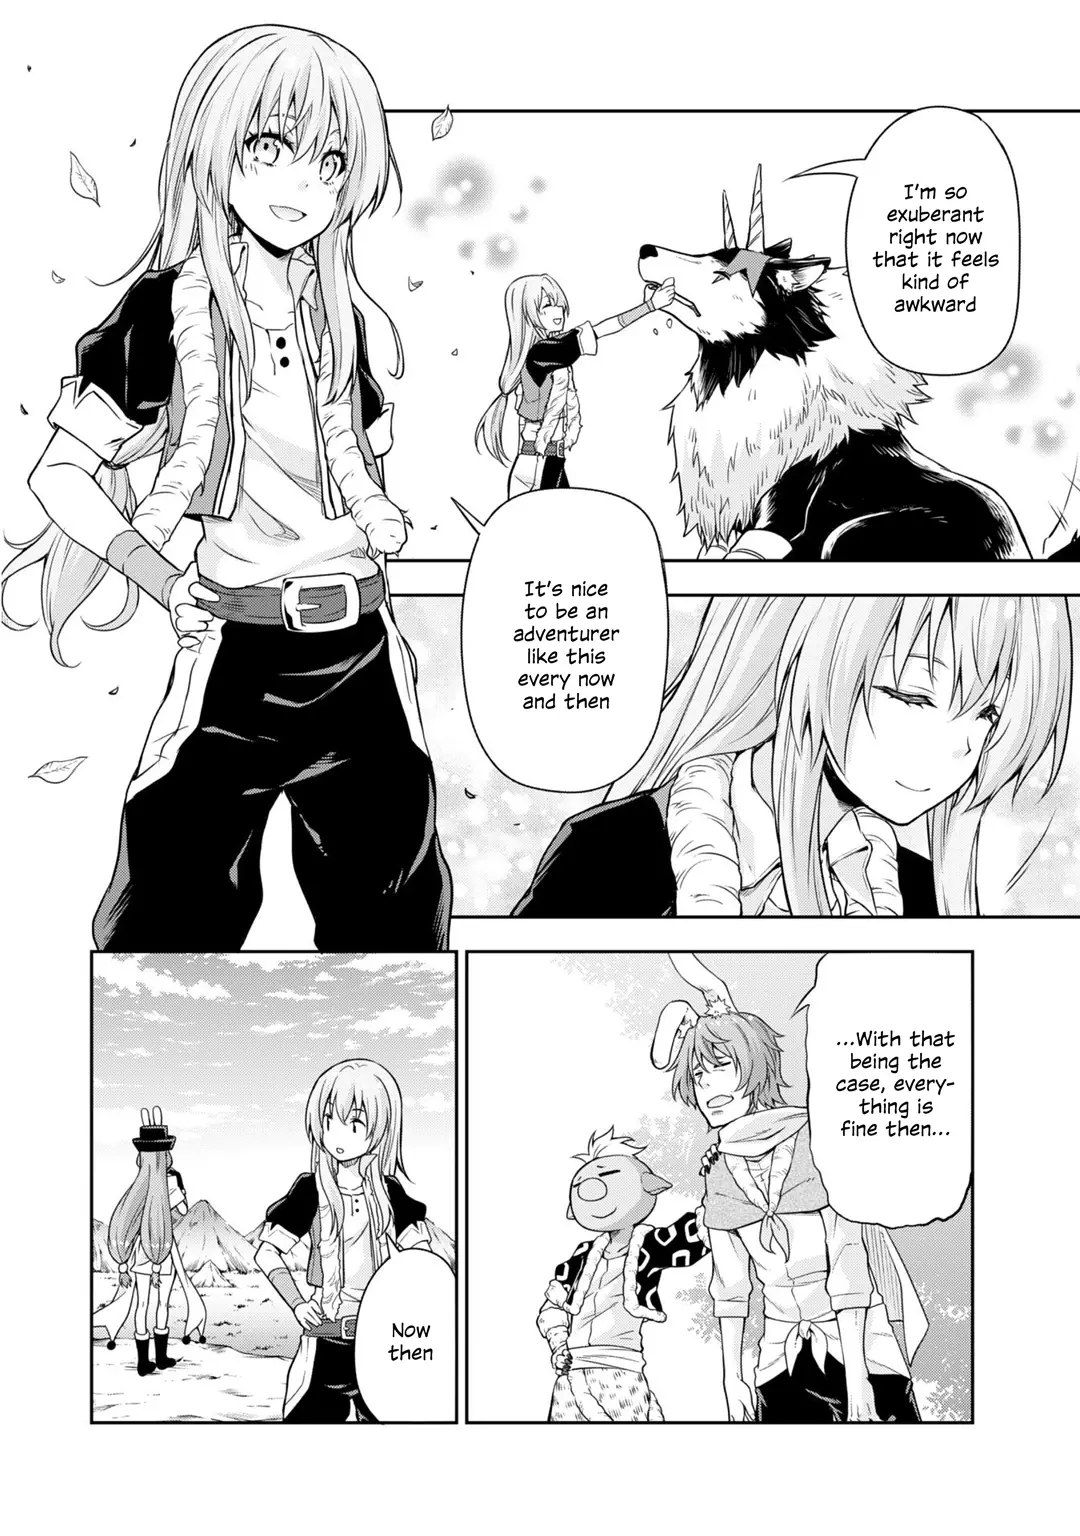 Tensei Shitara Slime Datta Ken: The Ways of Strolling in the Demon Country - 38 page 4